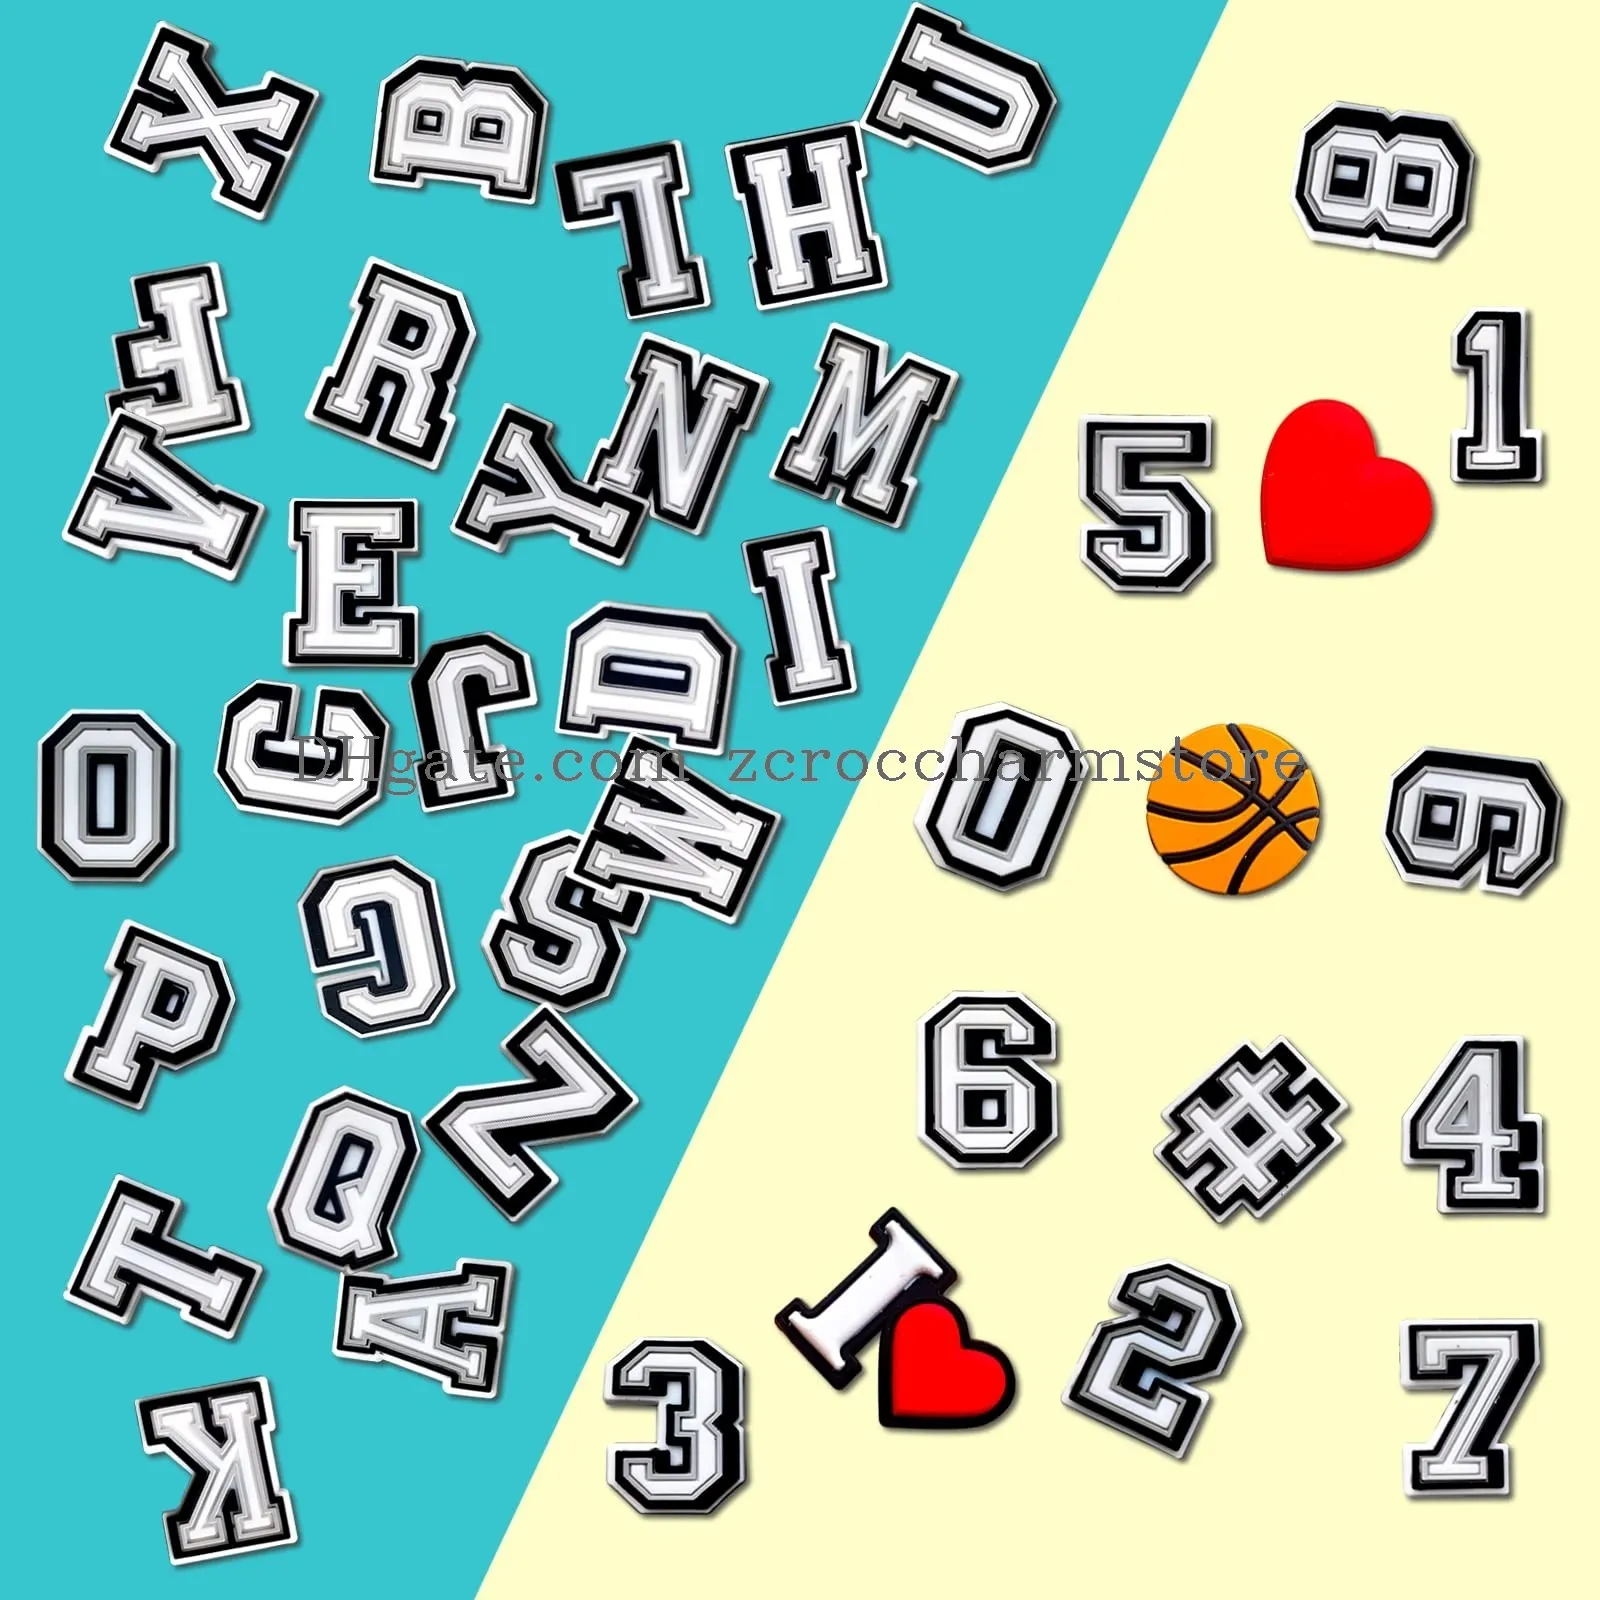 letter croc charms pack for  shoe decoration 09 number alphabet abcz characters love heart basketball designer shoes accessories pins for boys girls kids teens men women and adults party favor birthday gift pvc